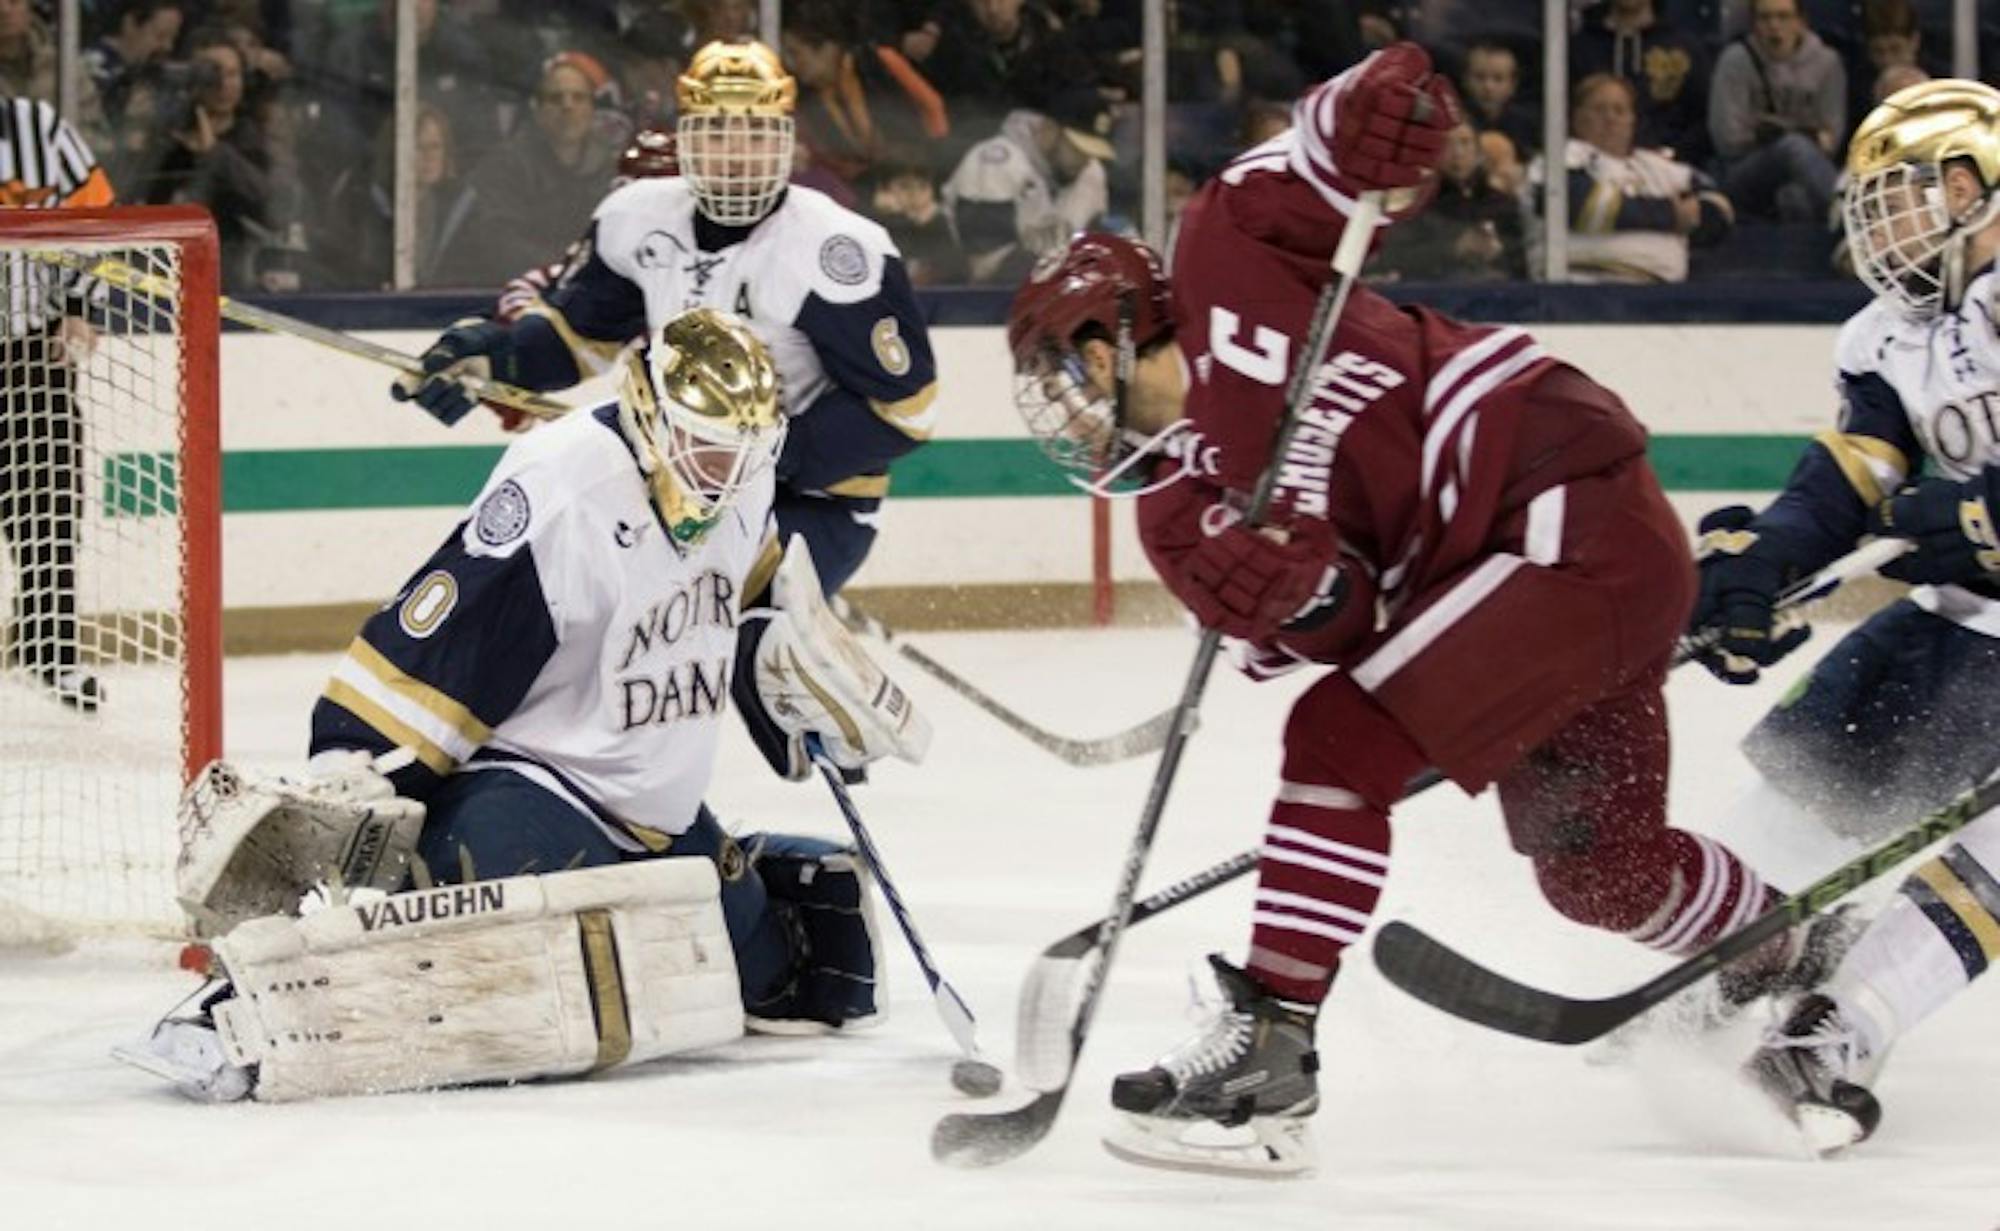 Sophomore goaltender Cal Petersen stops a shot during Notre Dame’s 5-1 home conference win over Massachusetts on Dec. 5.